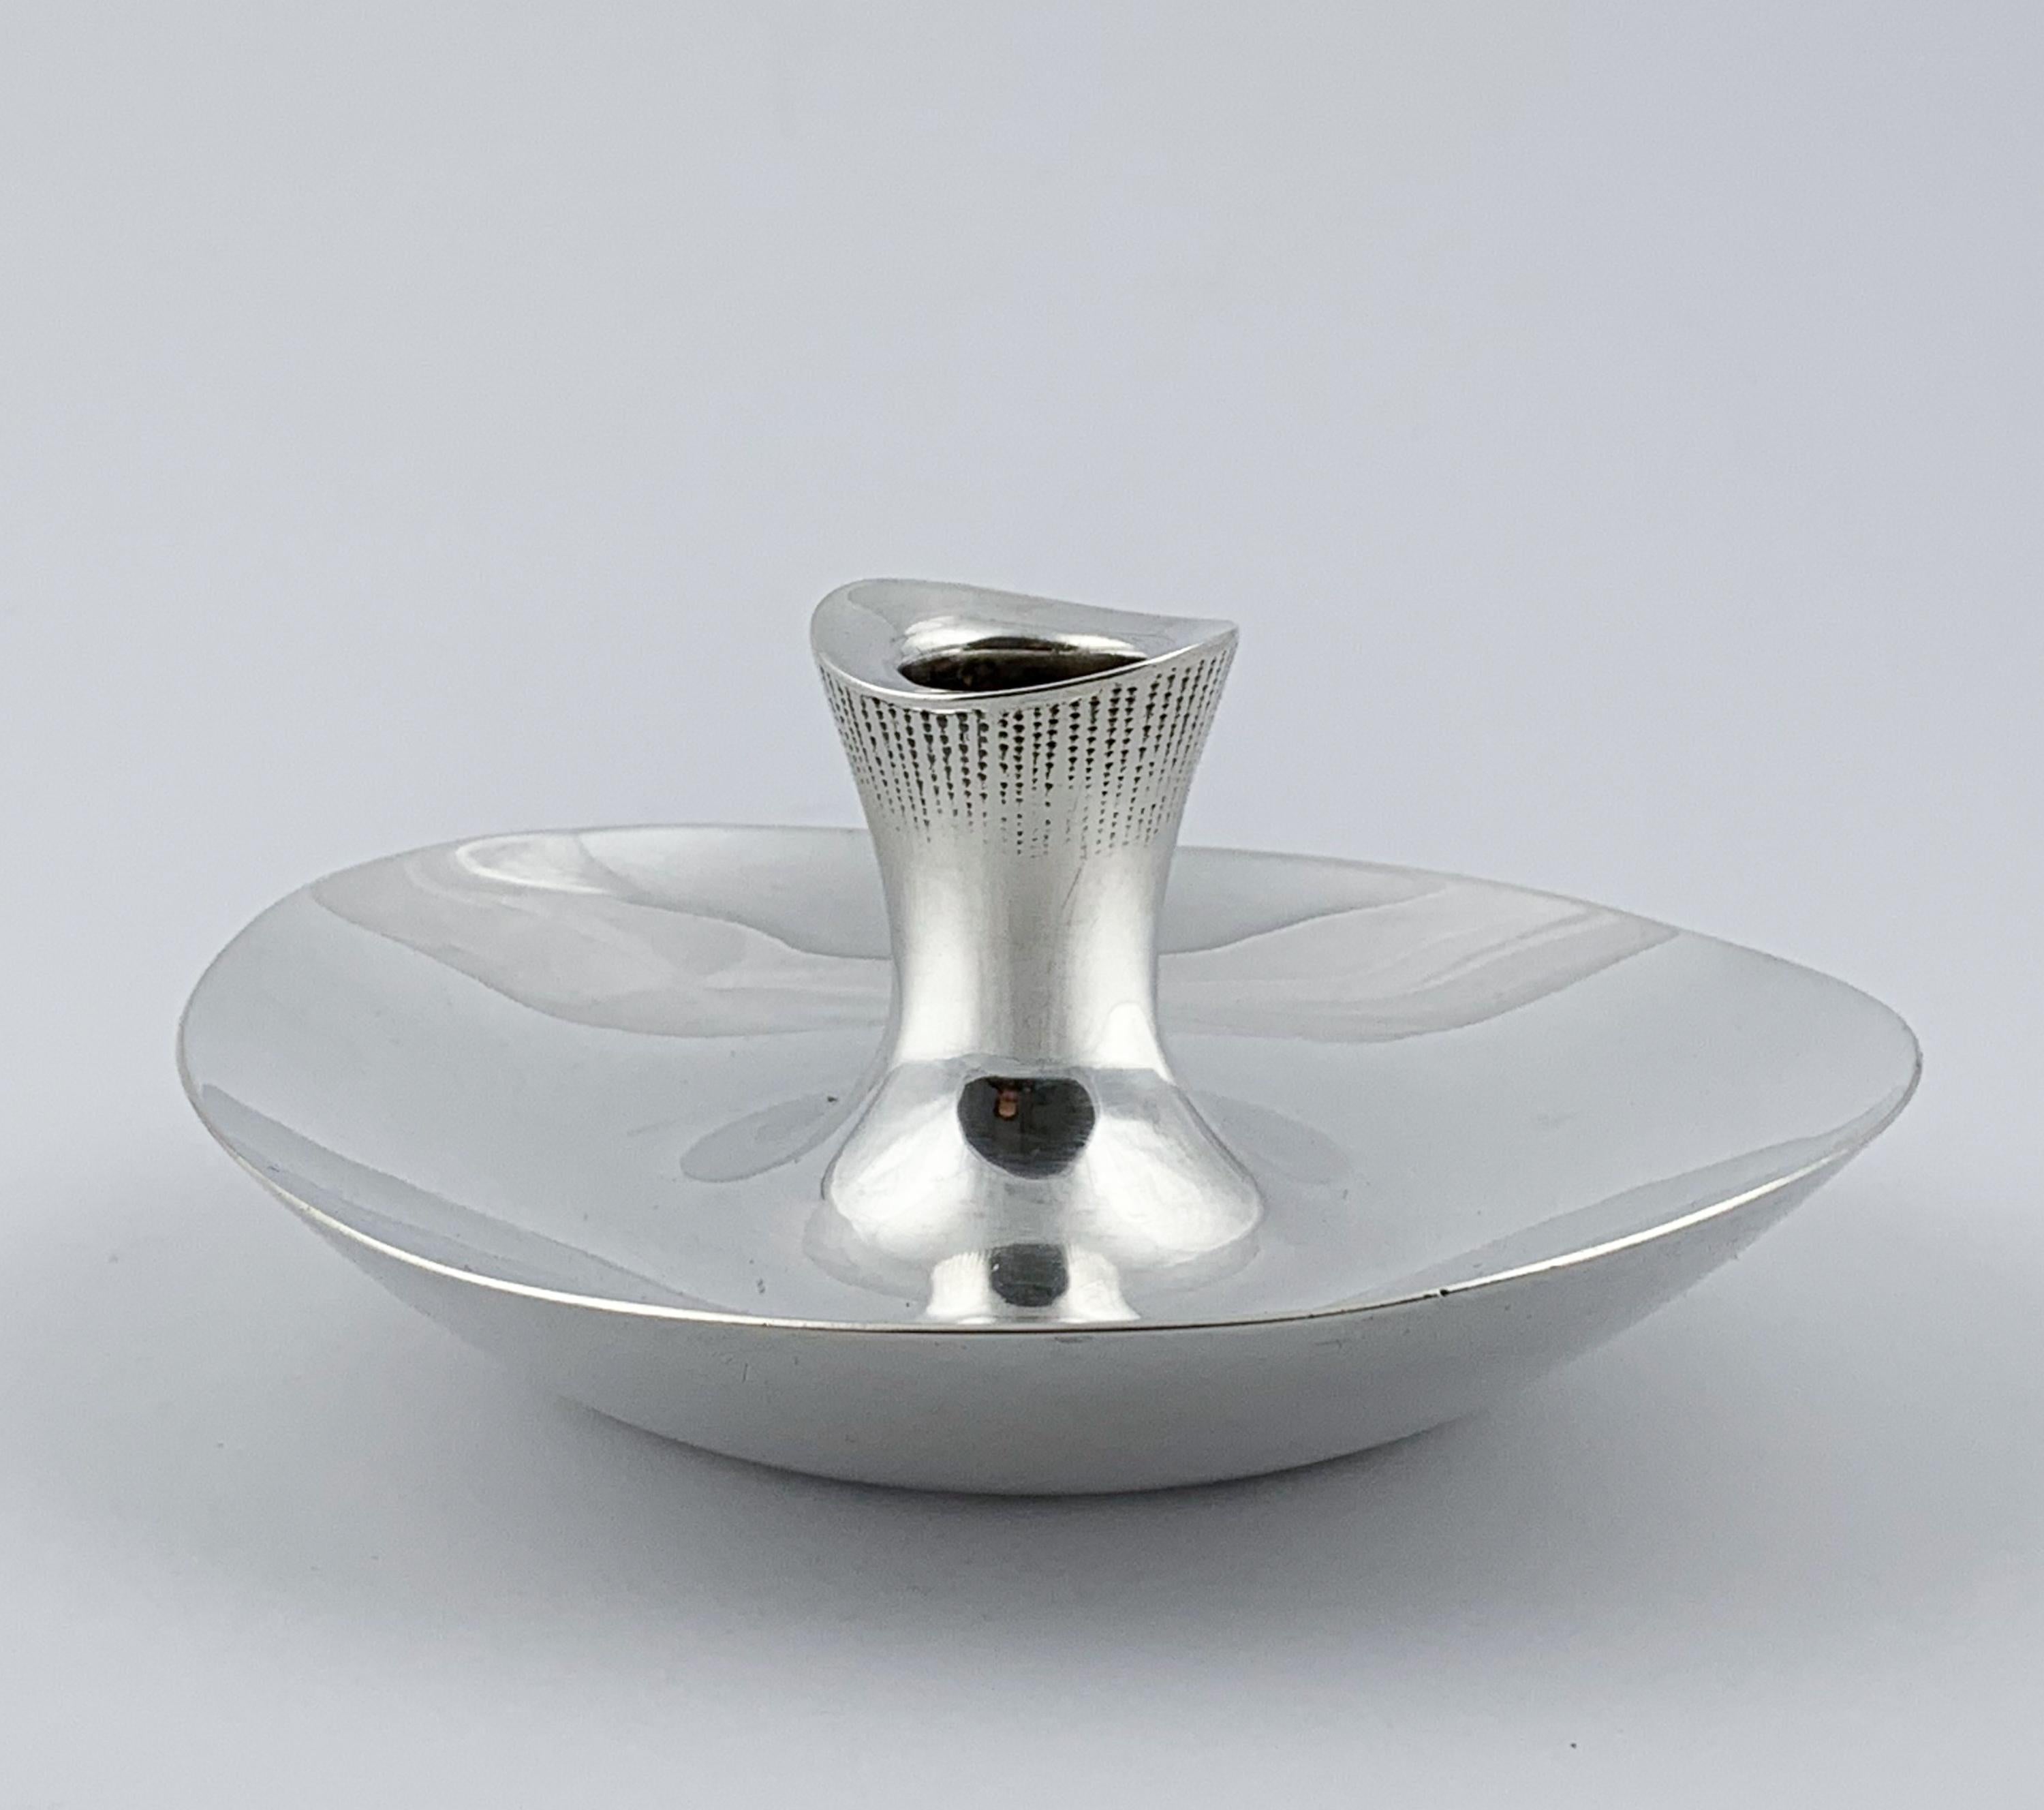 Hand-Crafted Tapio Wirkkala, Silver Candlestick with Engravings, Hopeatehdas Finland, 1959